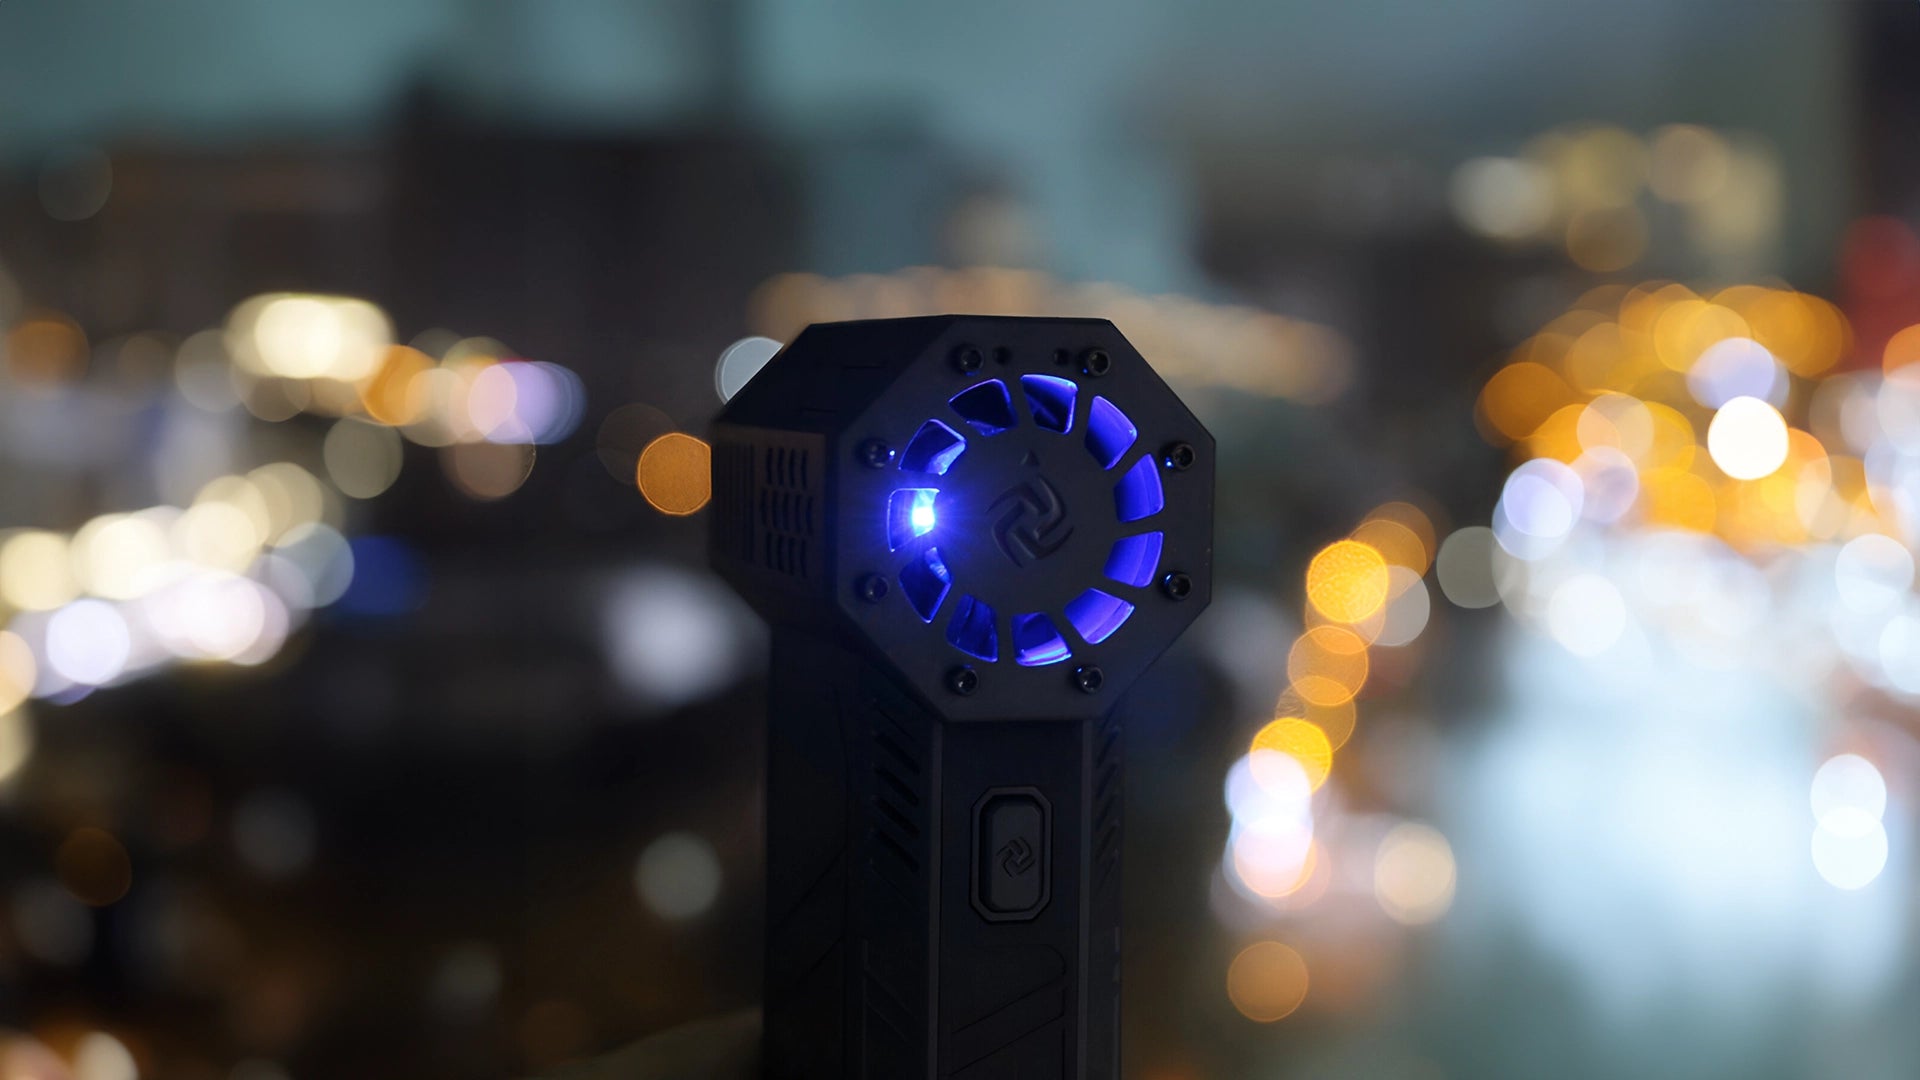 Compact jet blower with illuminated blue LED lights against a blurred city night lights backdrop, emphasizing the device's sleek design and modern aesthetic